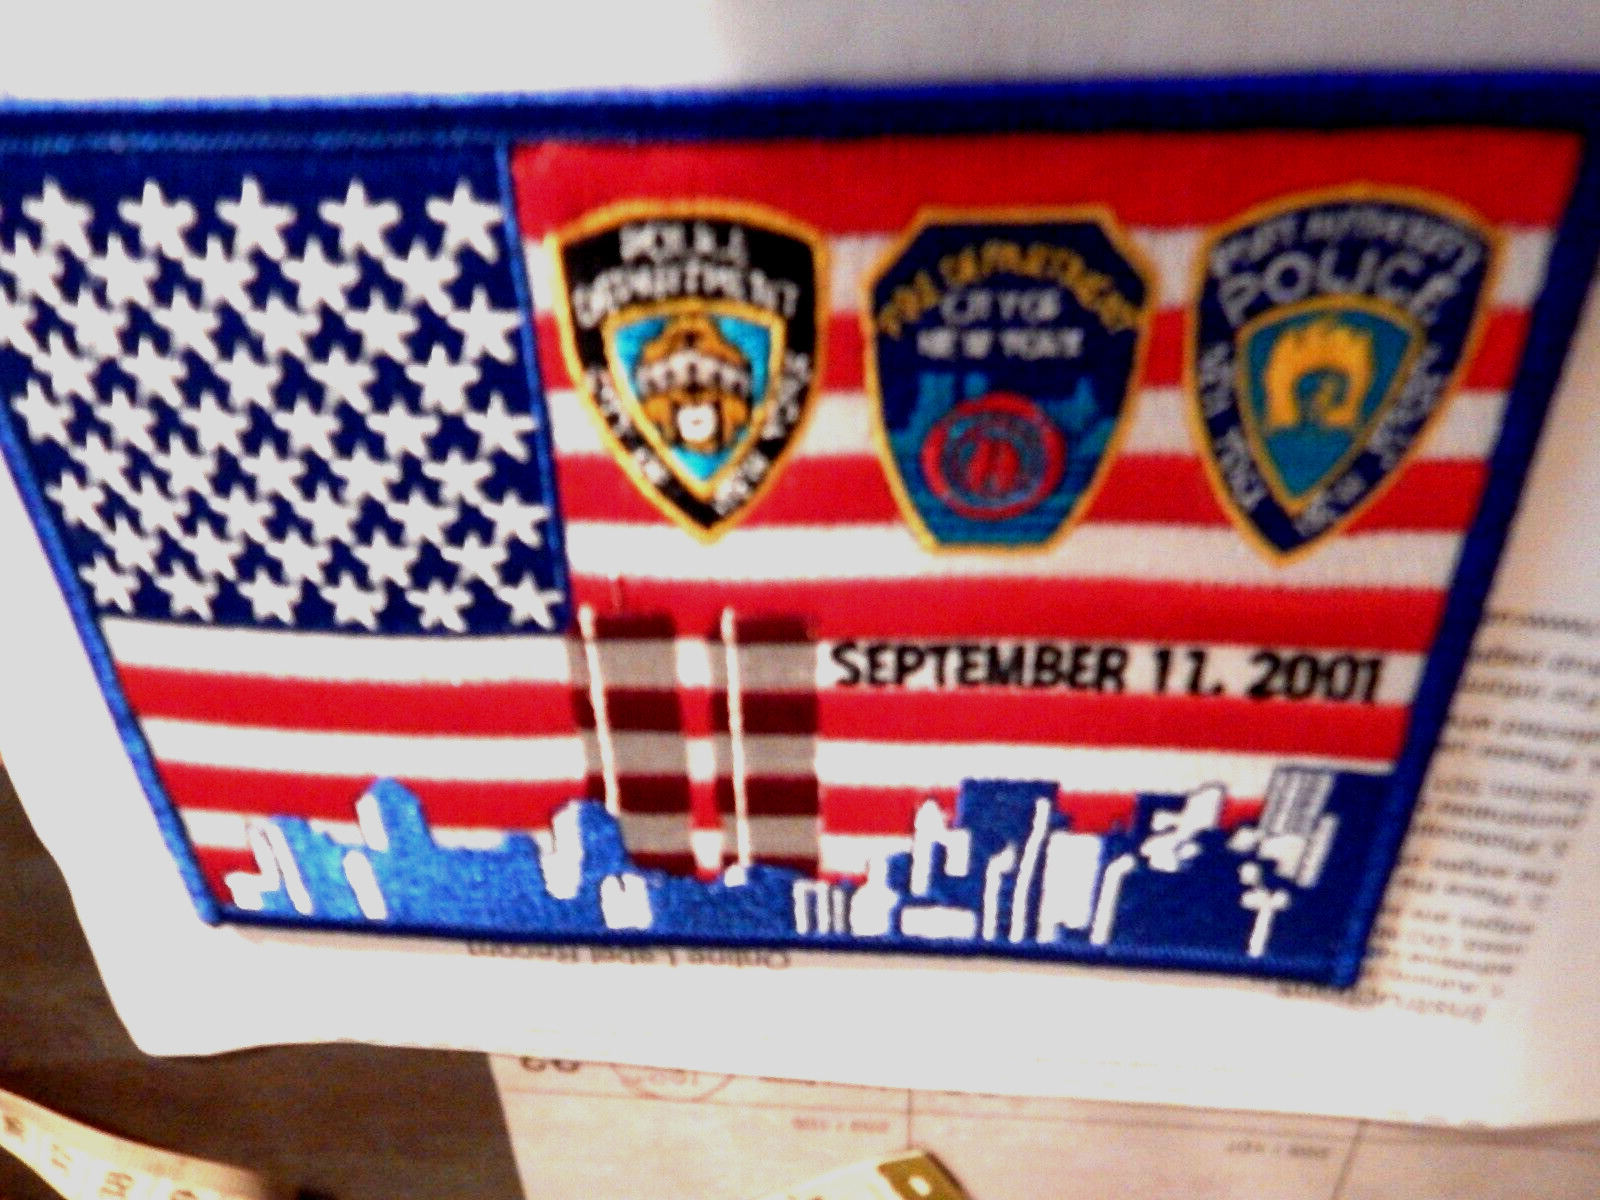 Fallen Brothers 911 September 11th 2001 WTC NY Memorial Patch